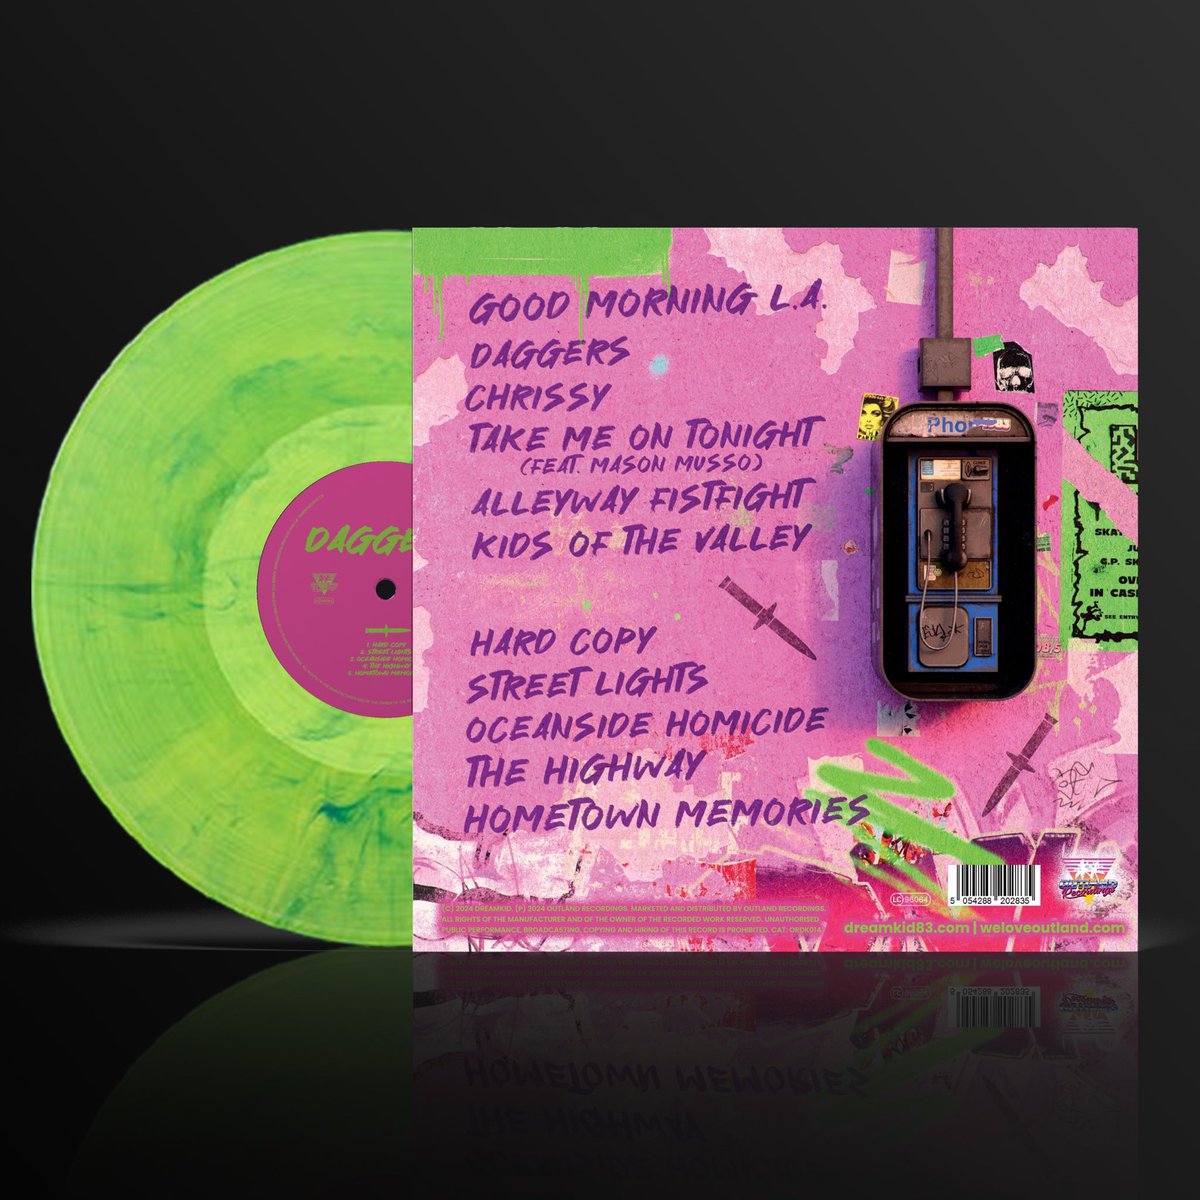 Vinyl of my new album ‘Daggers’ is now available to pre-order! I’m loving this Graffiti Green colour 🤘🏼💿🗡️

Pre-order link: dreamkid83.bandcamp.com/album/daggers

#synthwave #nostalgia #vinyl #retro #80s